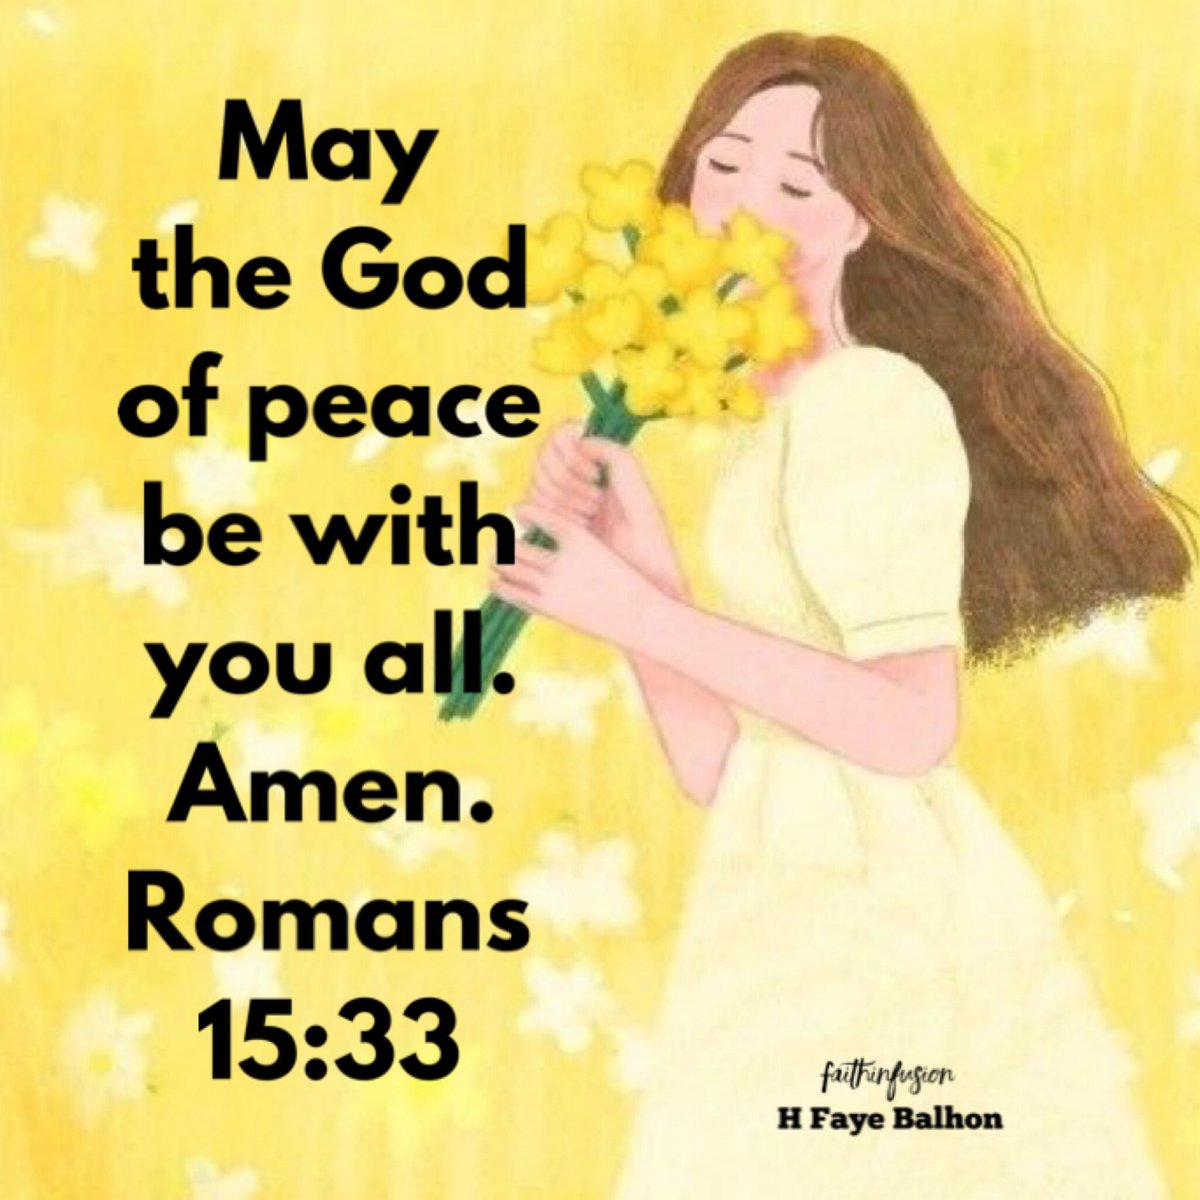 And the peace of God, which surpasses all understanding, will guard your hearts and your minds in Christ Jesus. Philippians 4:7 God bless. Shalom.🍃🍇🌾 #FaithinfusionNotes🌼 #HFayeBalhon